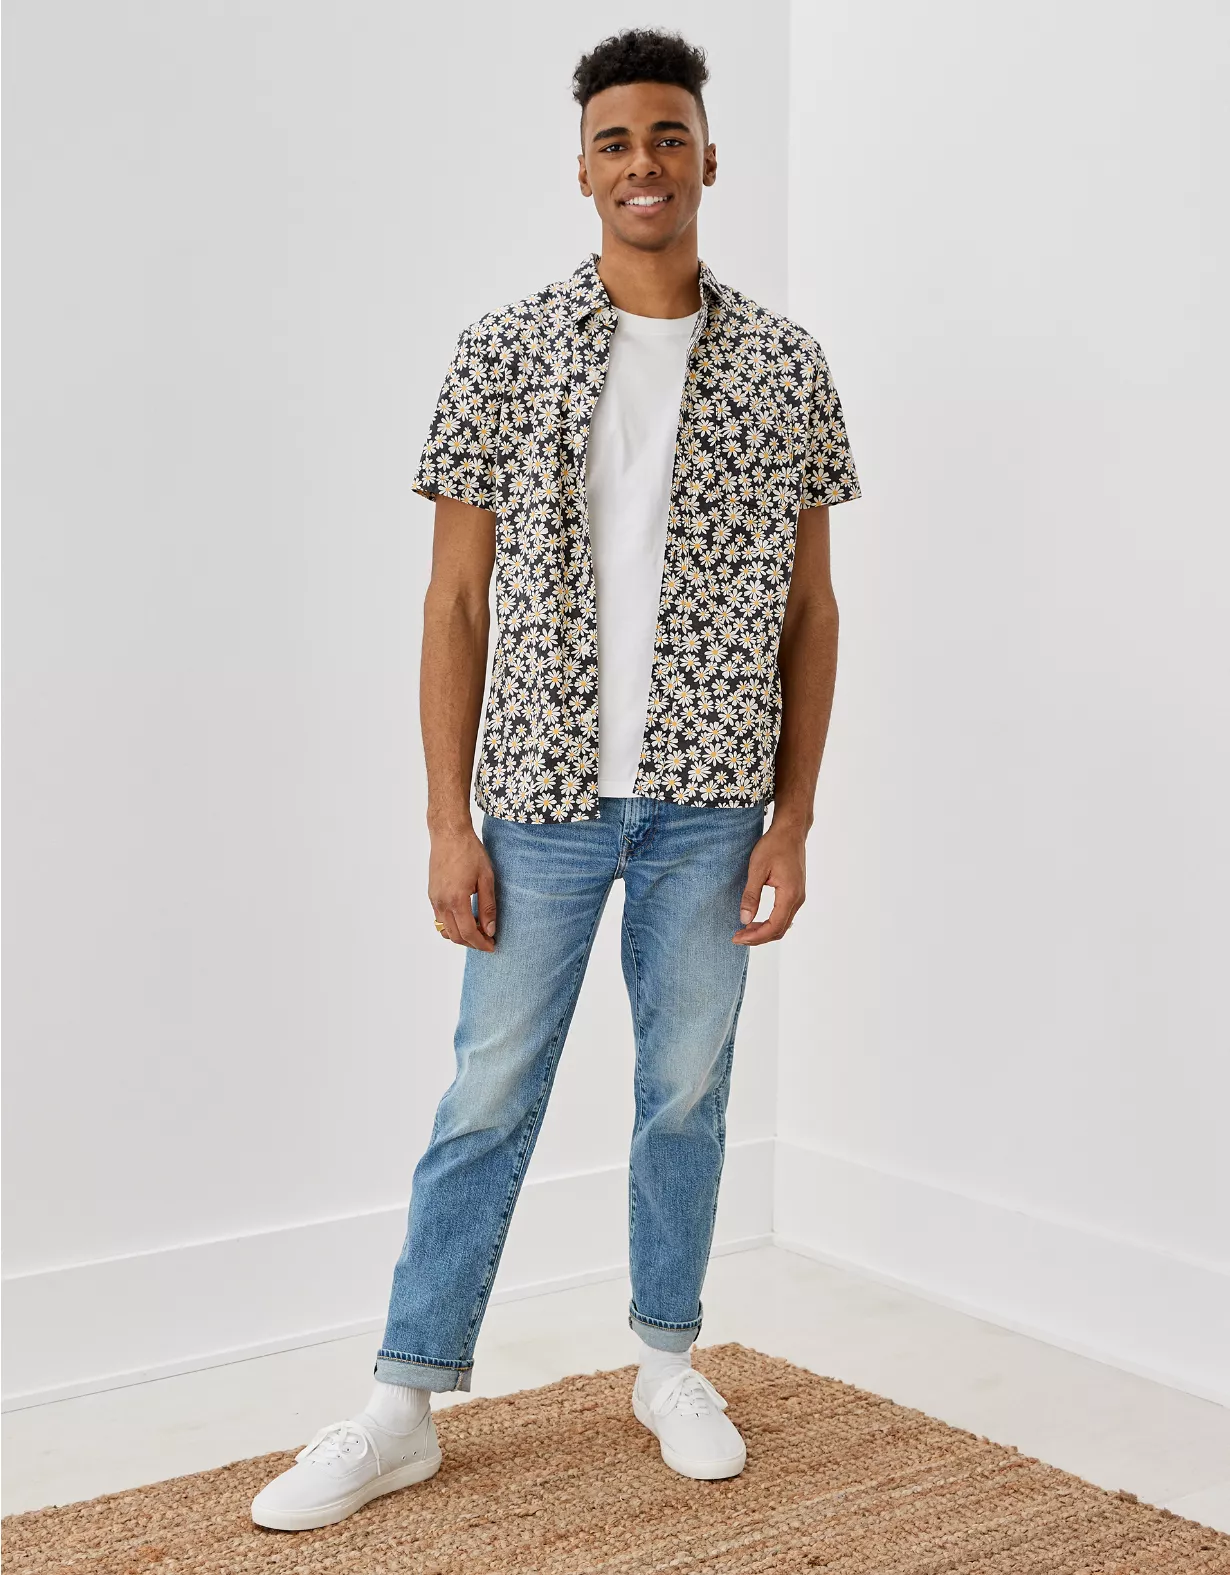 AE Floral Button-Up Resort Shirt